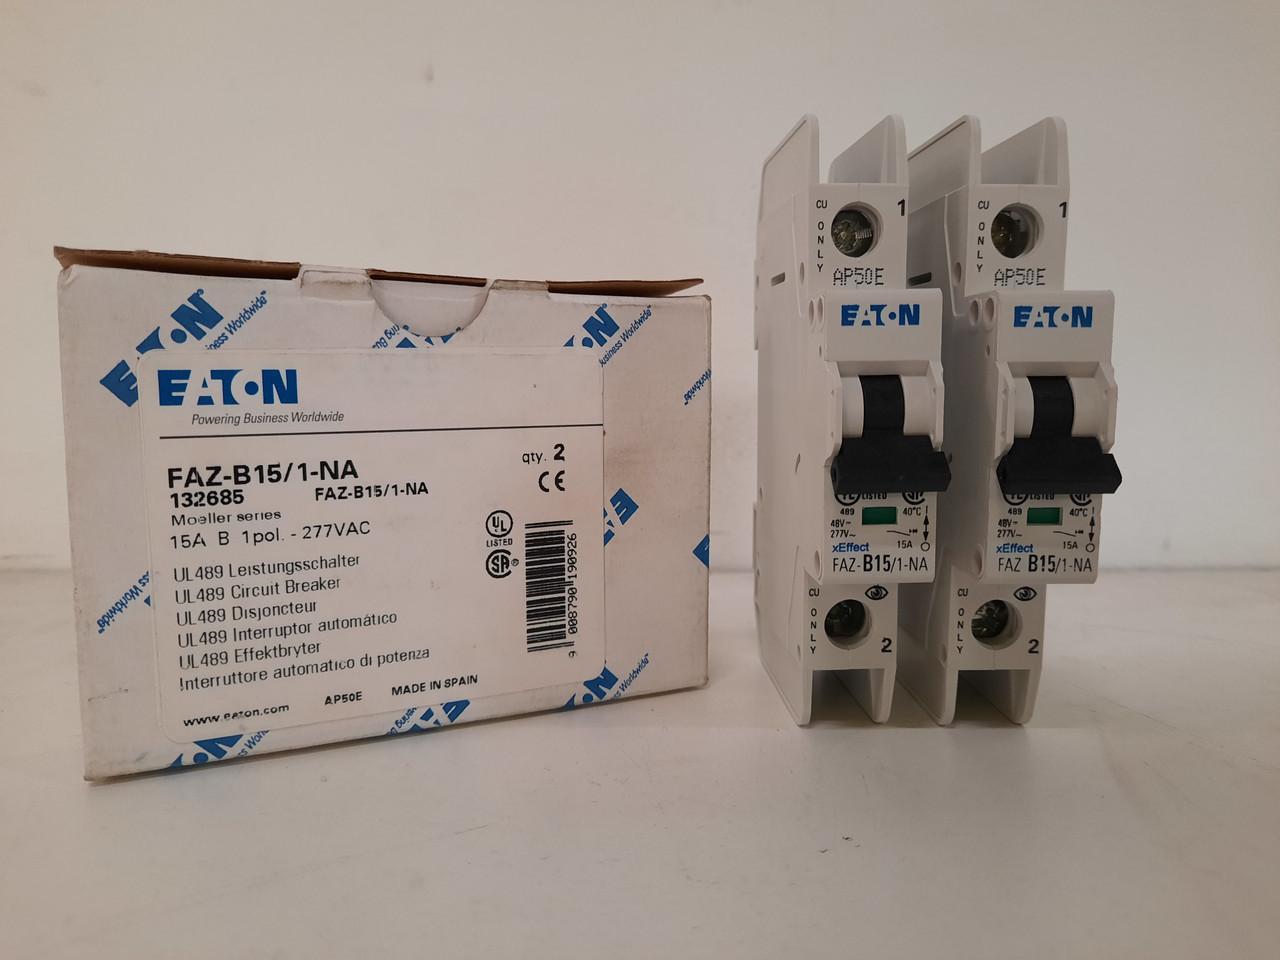 Eaton FAZ-B15/1-NA 277/480 VAC 50/60 Hz, 15 A, 1-Pole, 10/14 kA, 3 to 5 x Rated Current, Screw Terminal, DIN Rail Mount, Standard Packaging, B-Curve, Current Limiting, Thermal Magnetic, Miniature Circuit Breaker